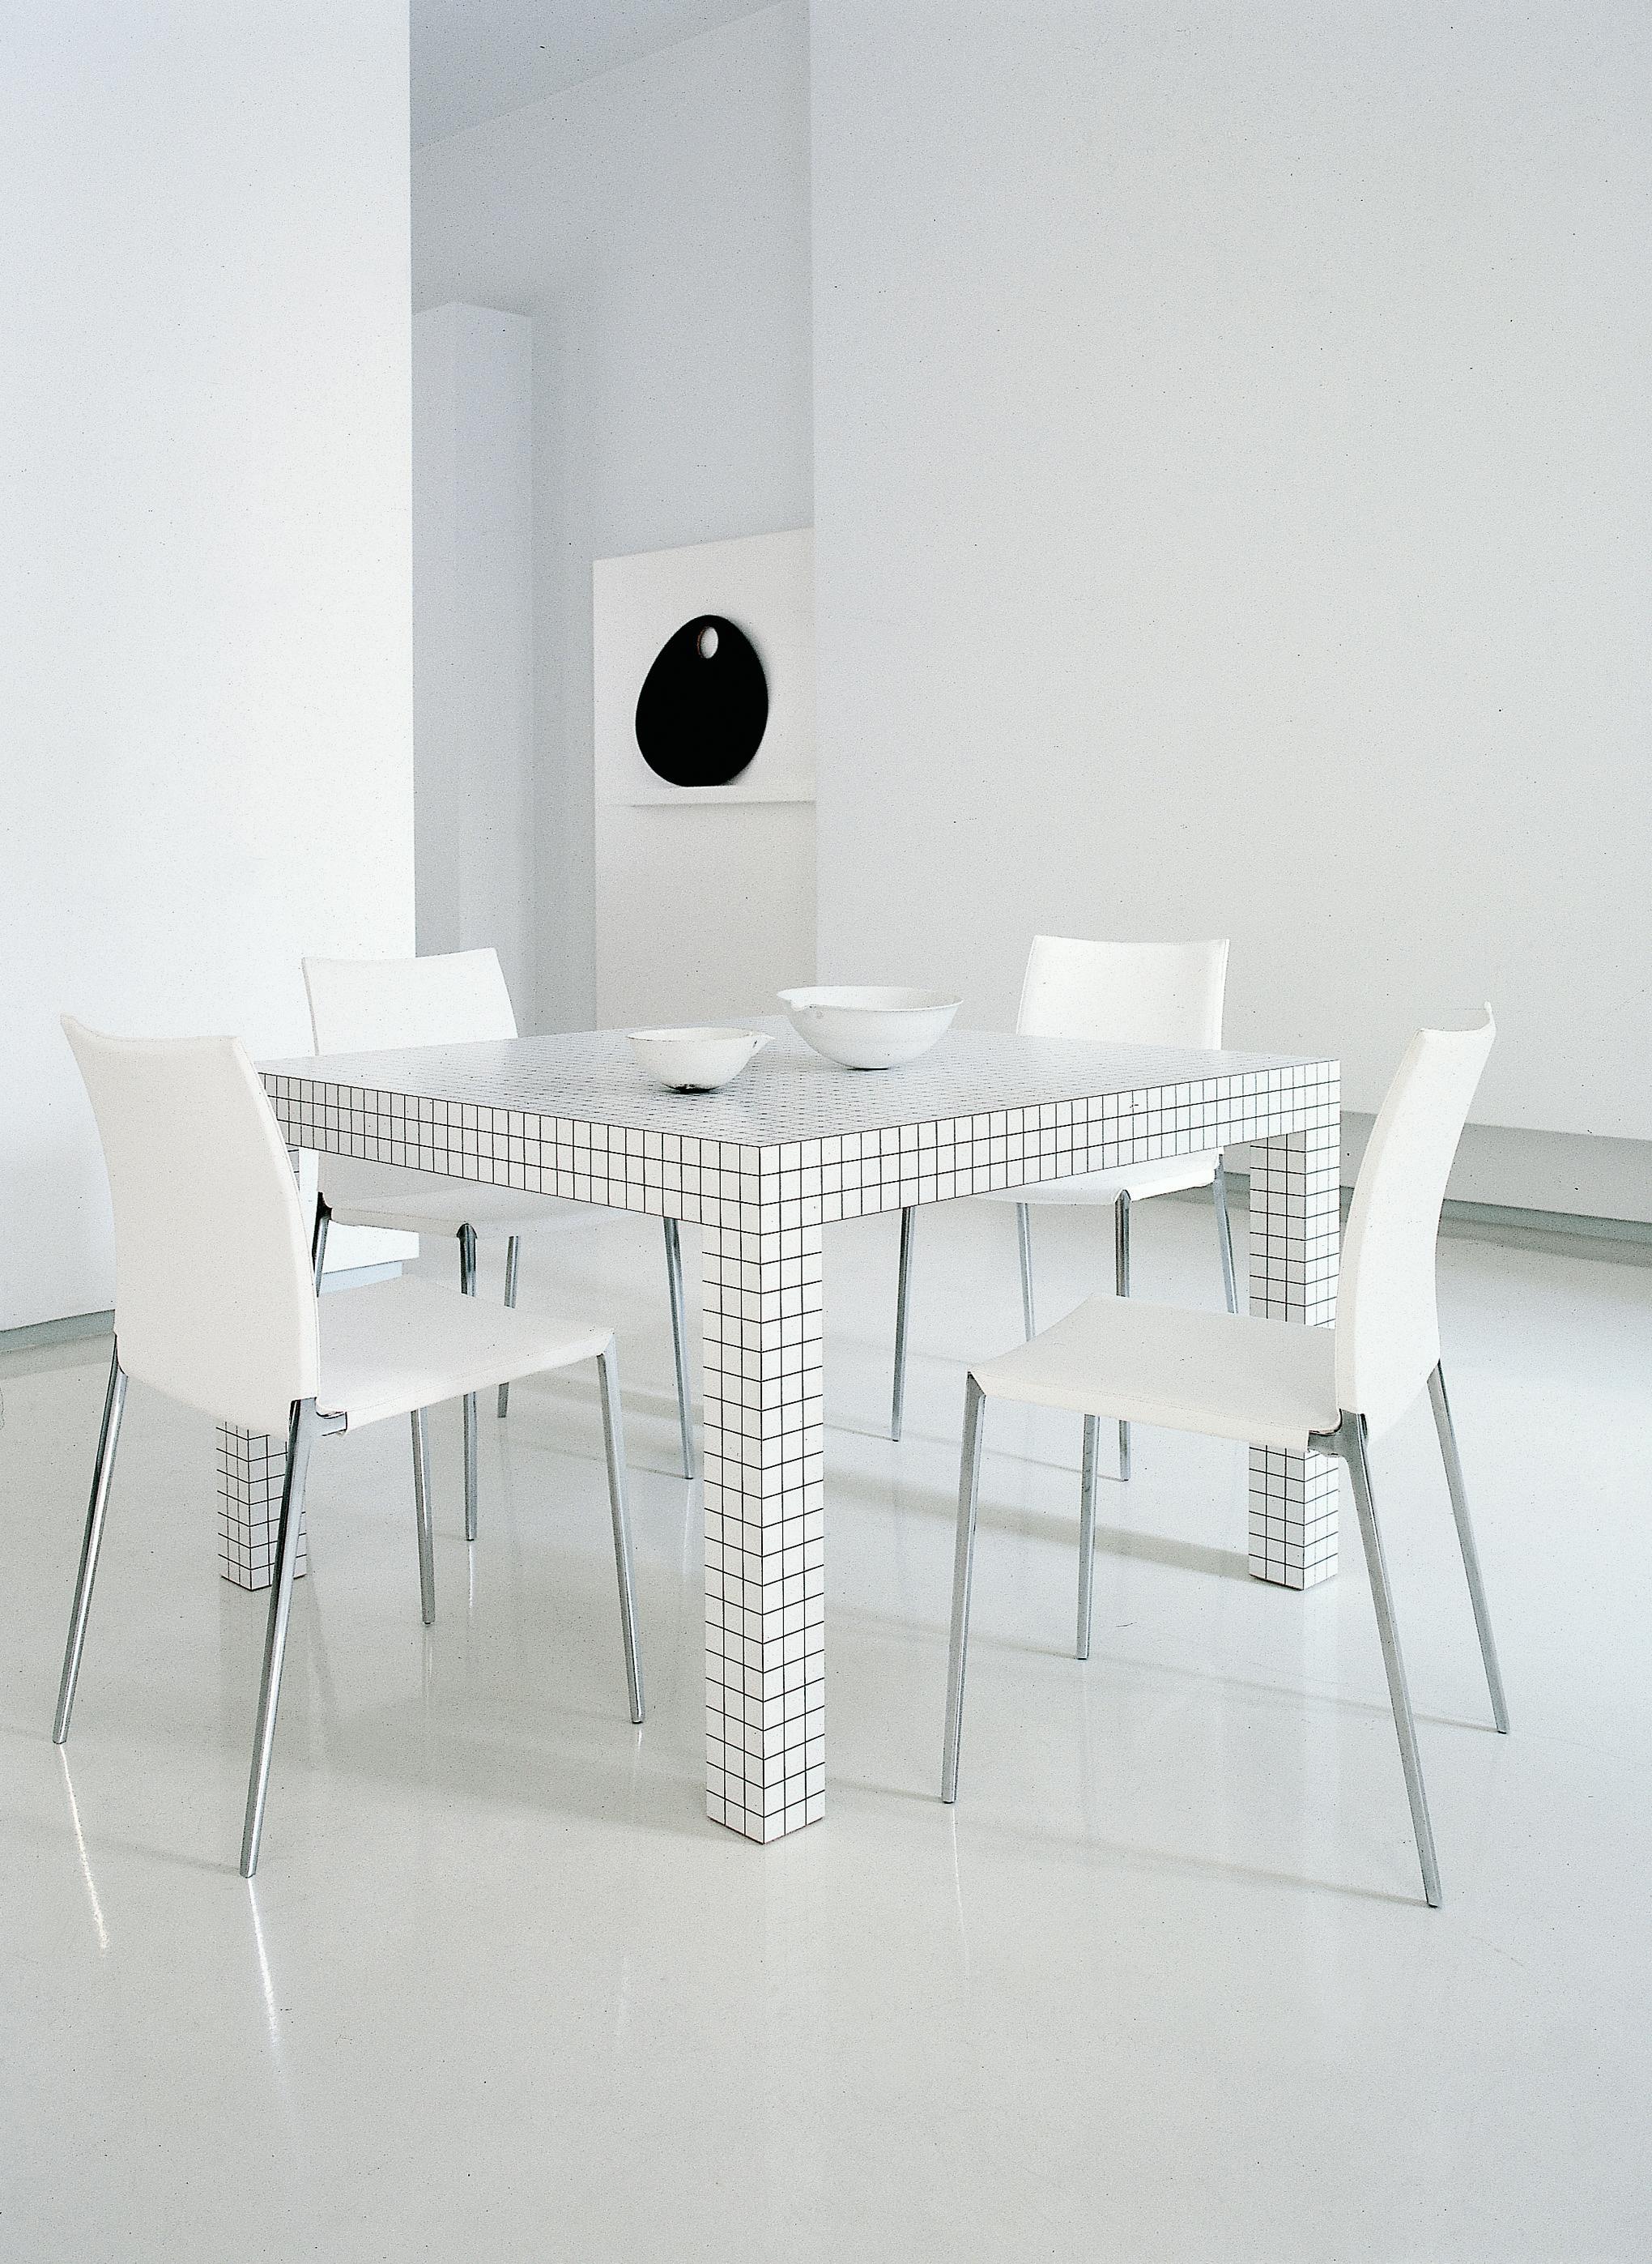 Zanotta Large Quaderna Table/Writing Desk in White Plastic Laminate, Superstudio

Honeycomb core structure coated with white plastic laminate, digitally printed with black squares at 1 3/16” spacing.

Additional Information:
Material: Plastic